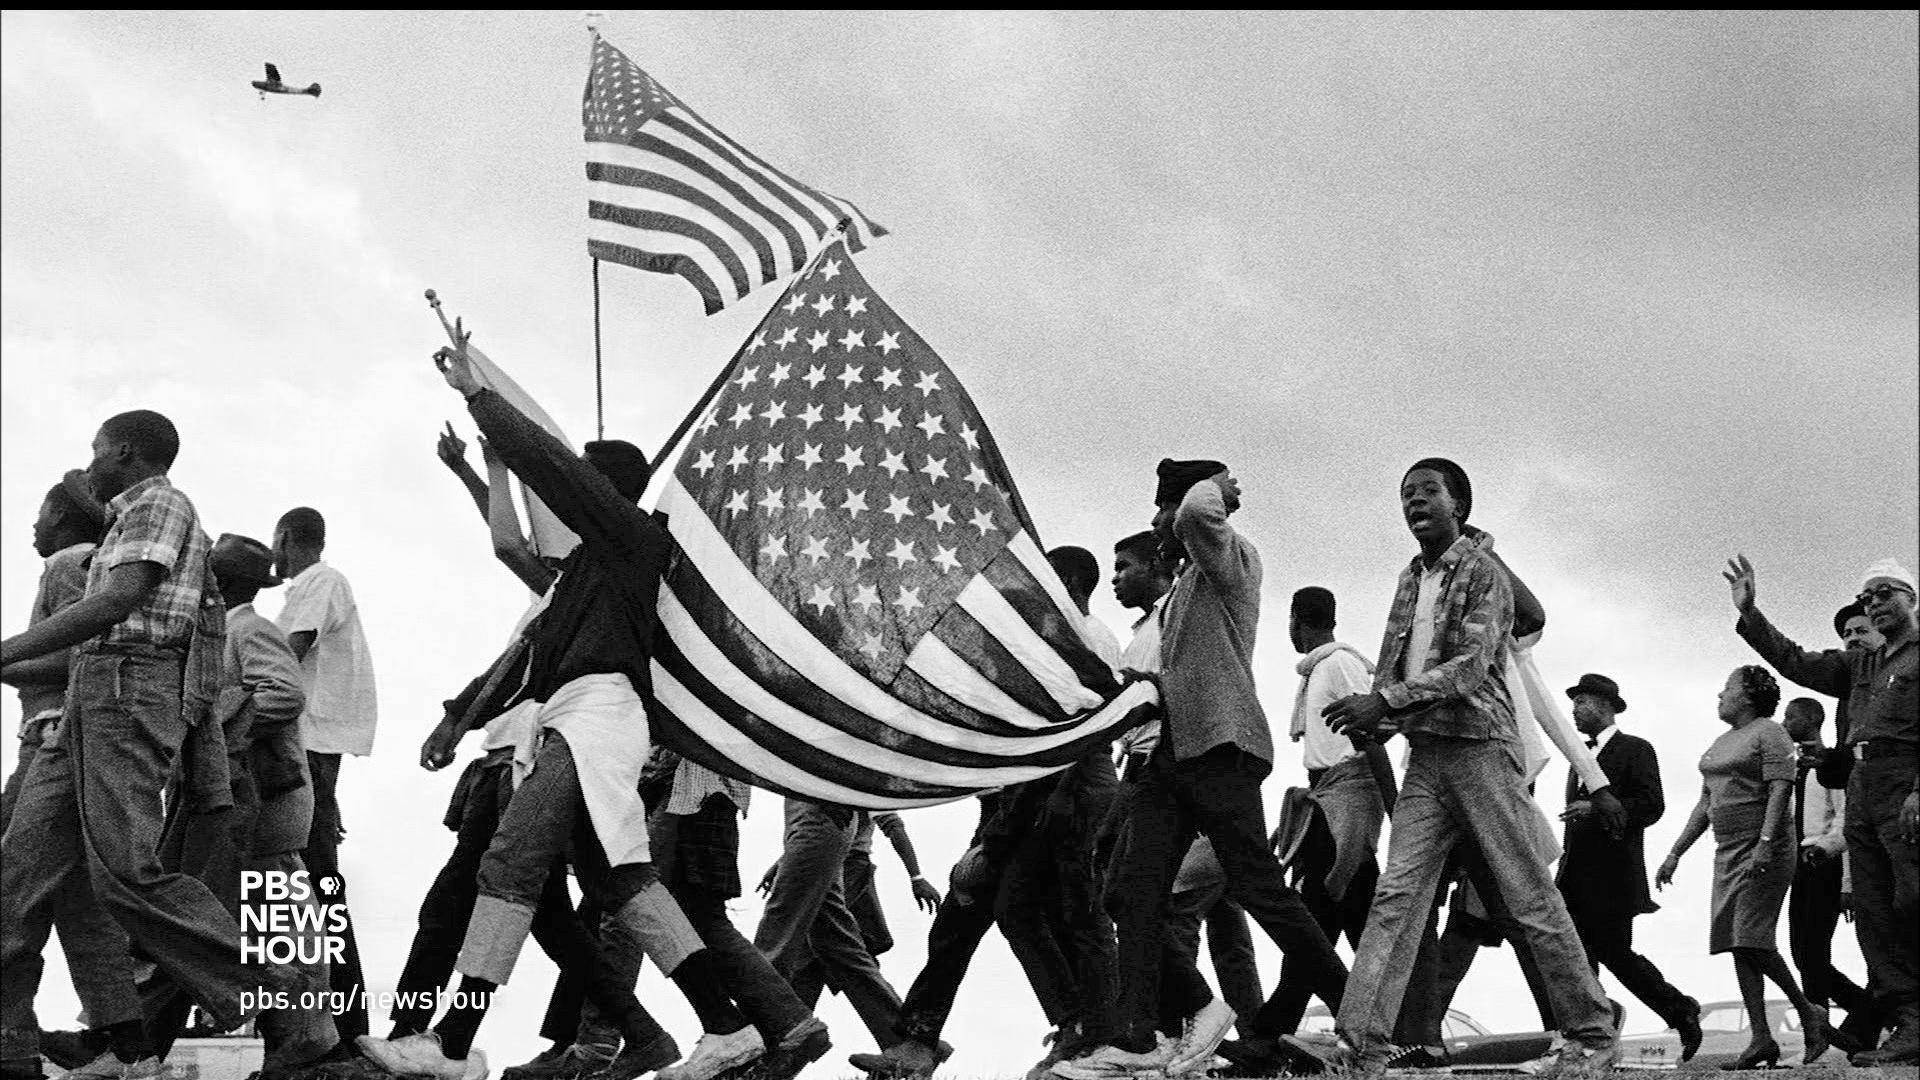 PBS NewsHour | Photos show undeniable history of the civil rights movement  | Season 2017 | PBS